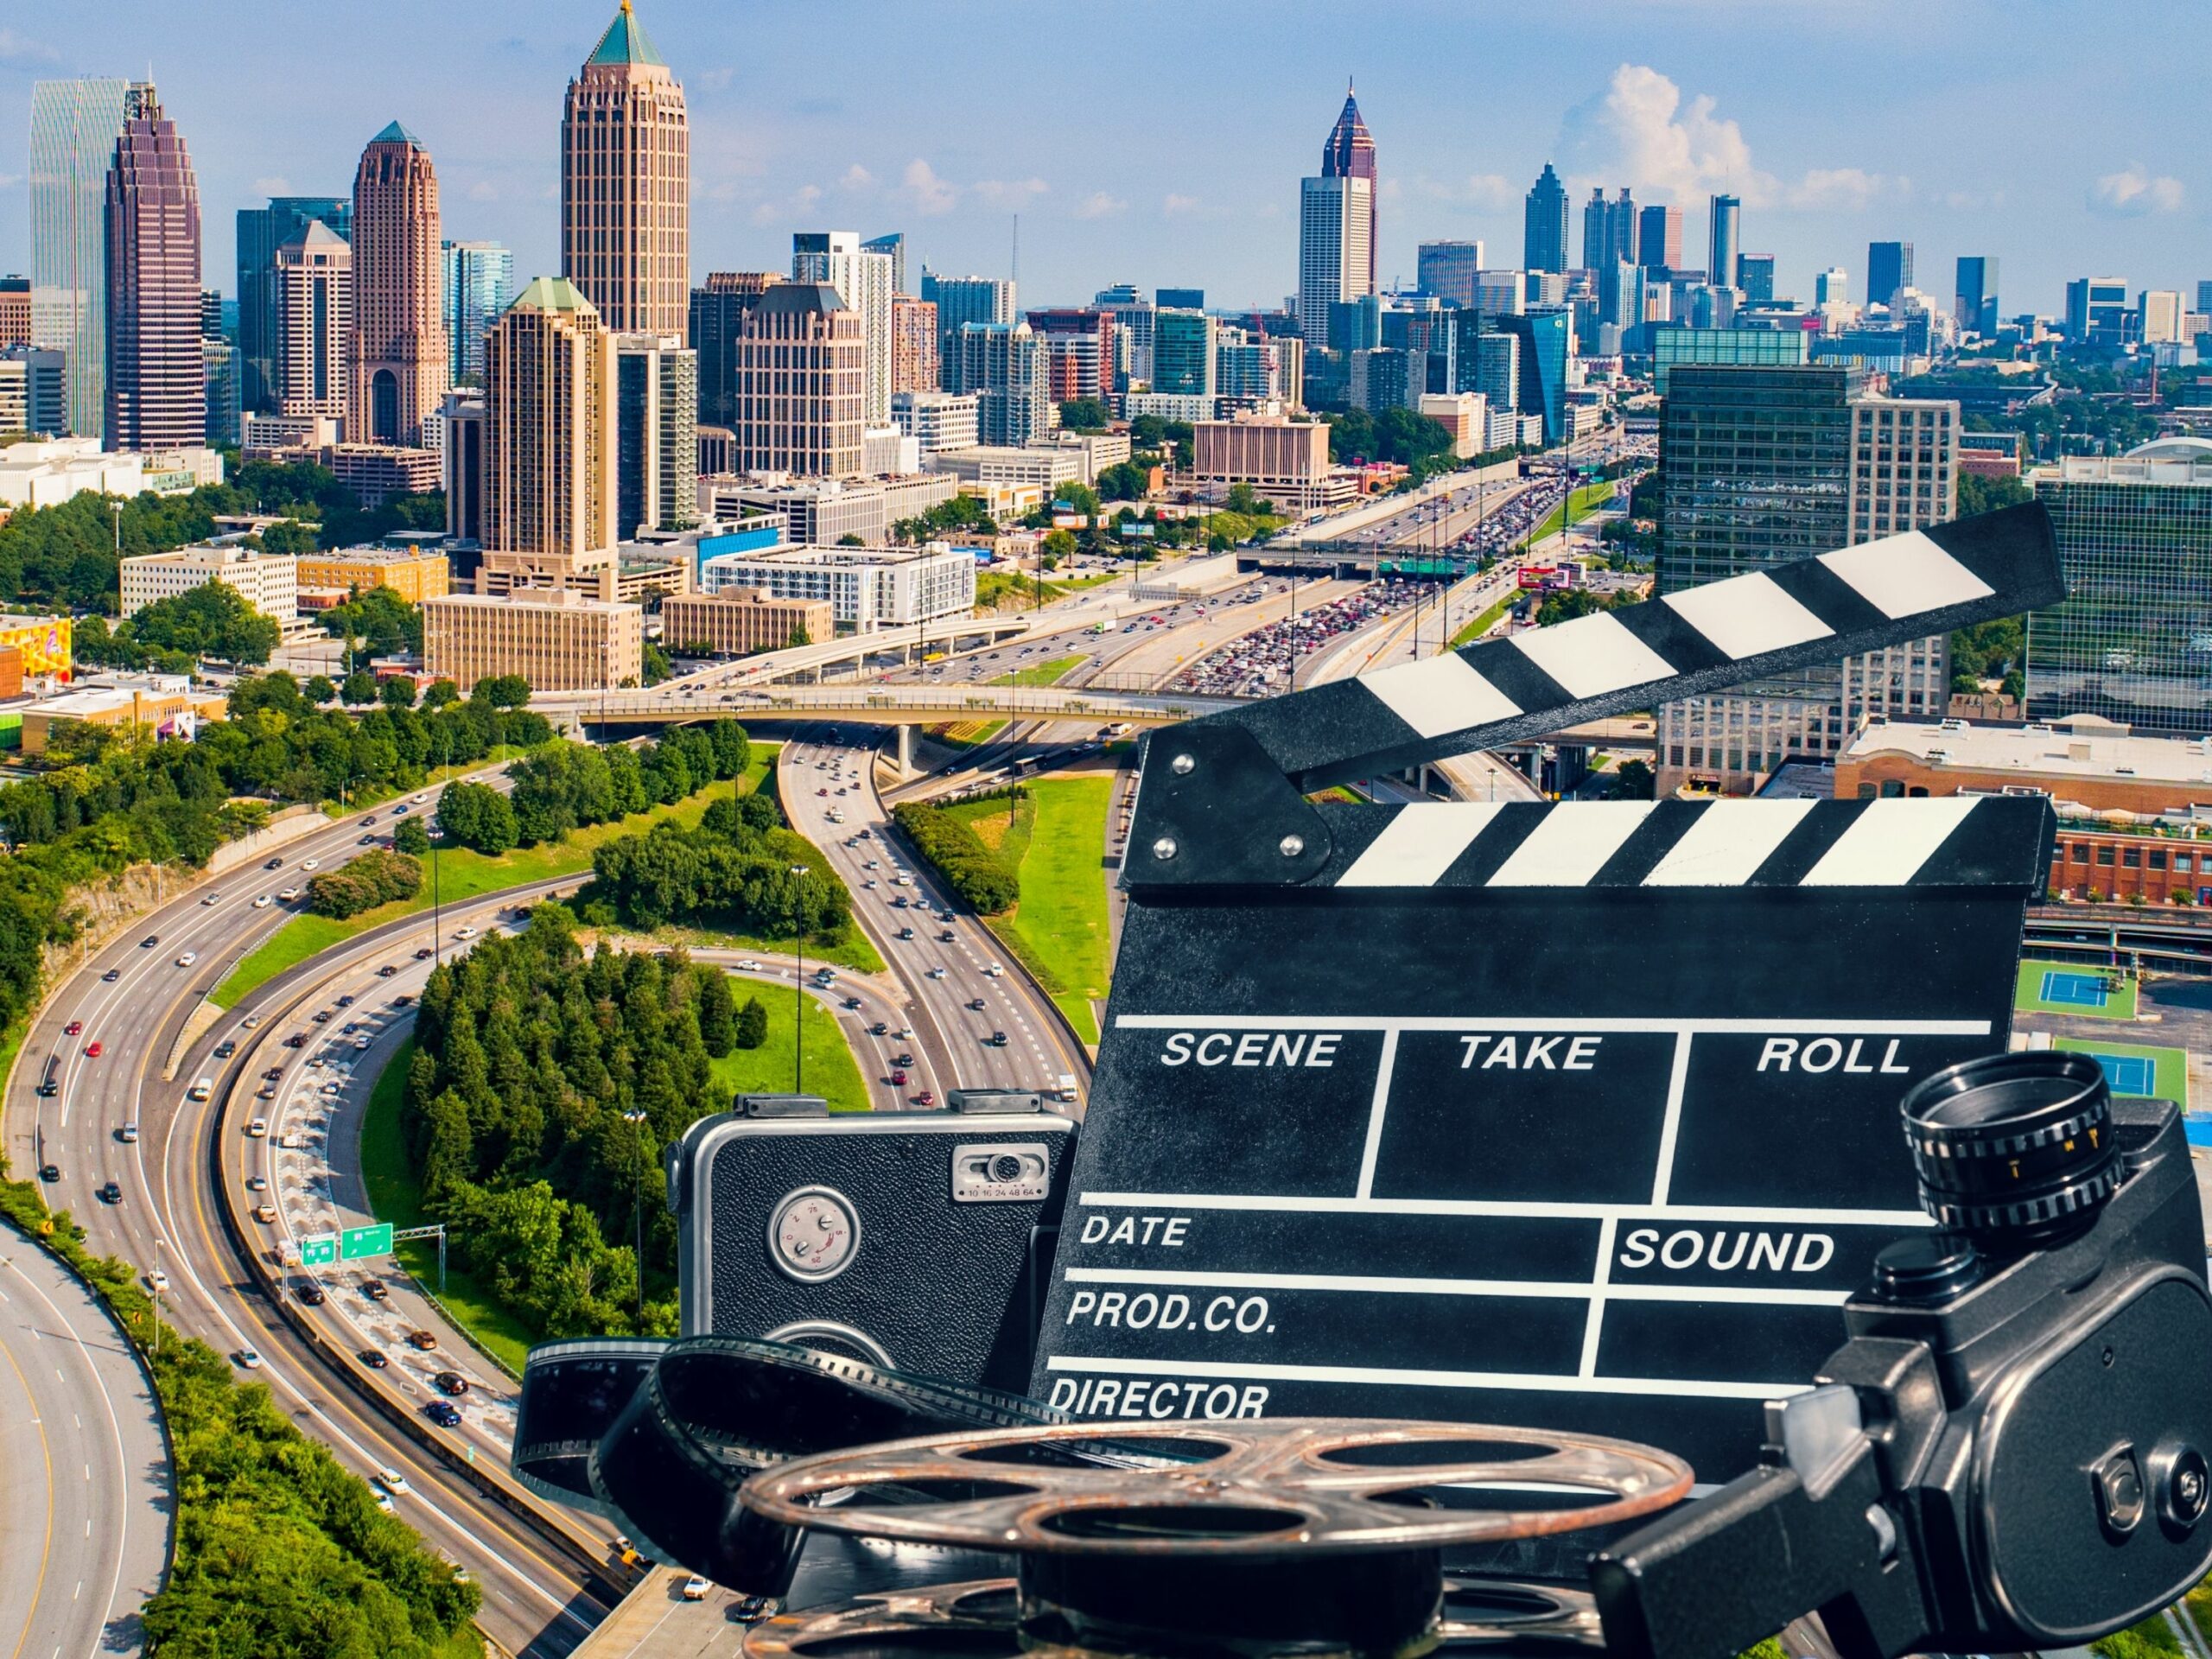 12 Extraordinary Movies Set In Atlanta That Will Inspire You To Visit!